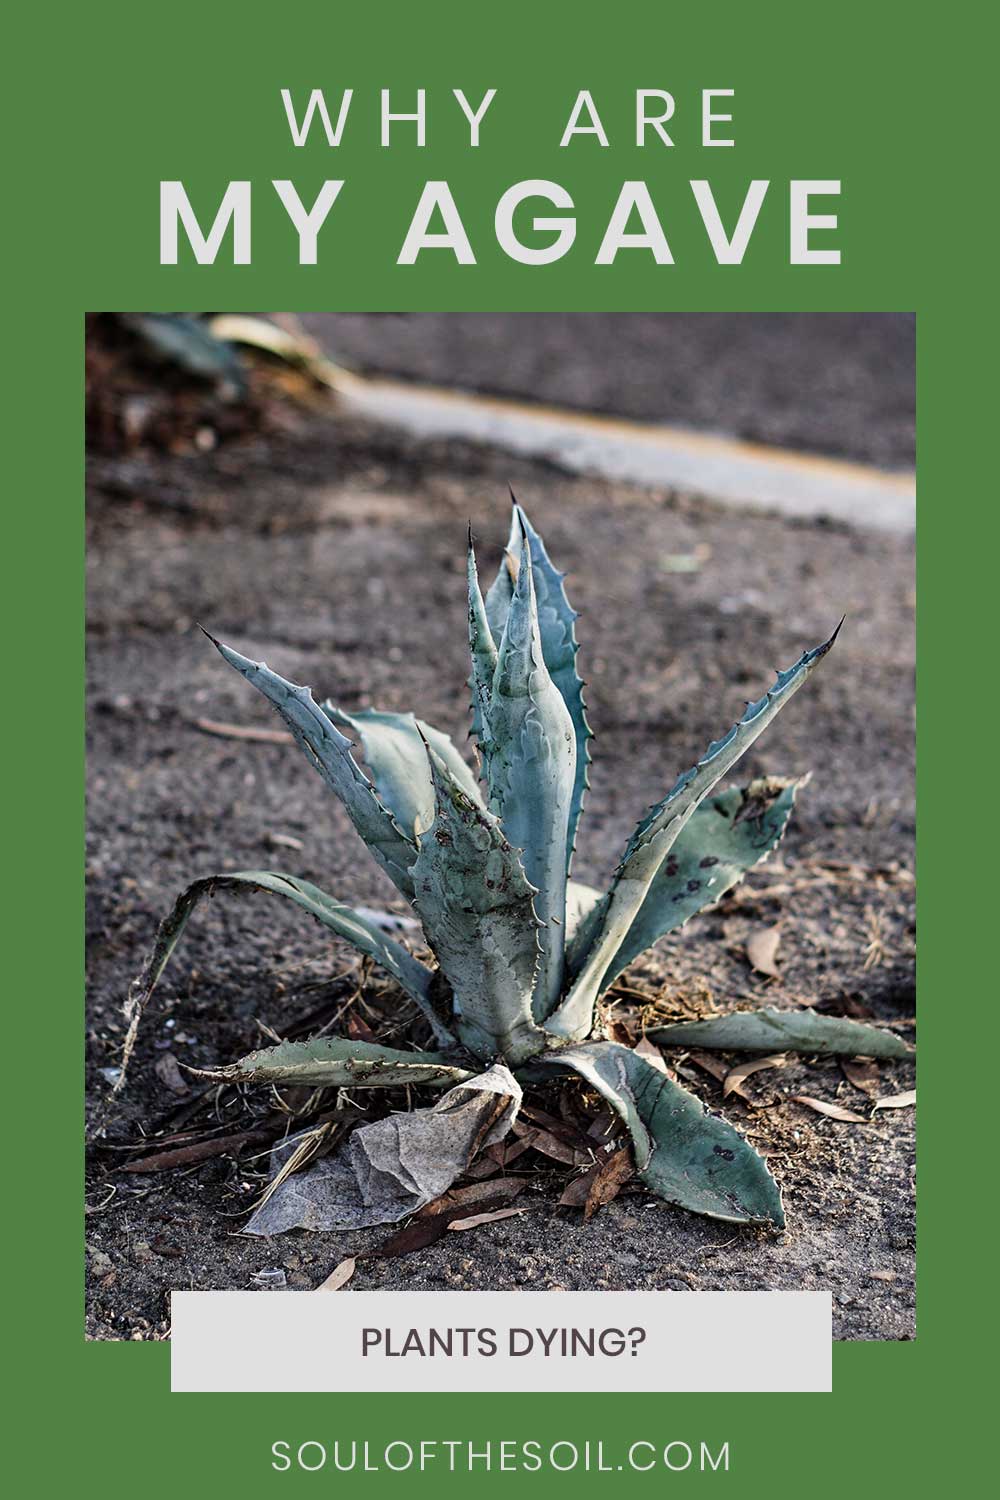 Why Are My Agave Plants Dying?